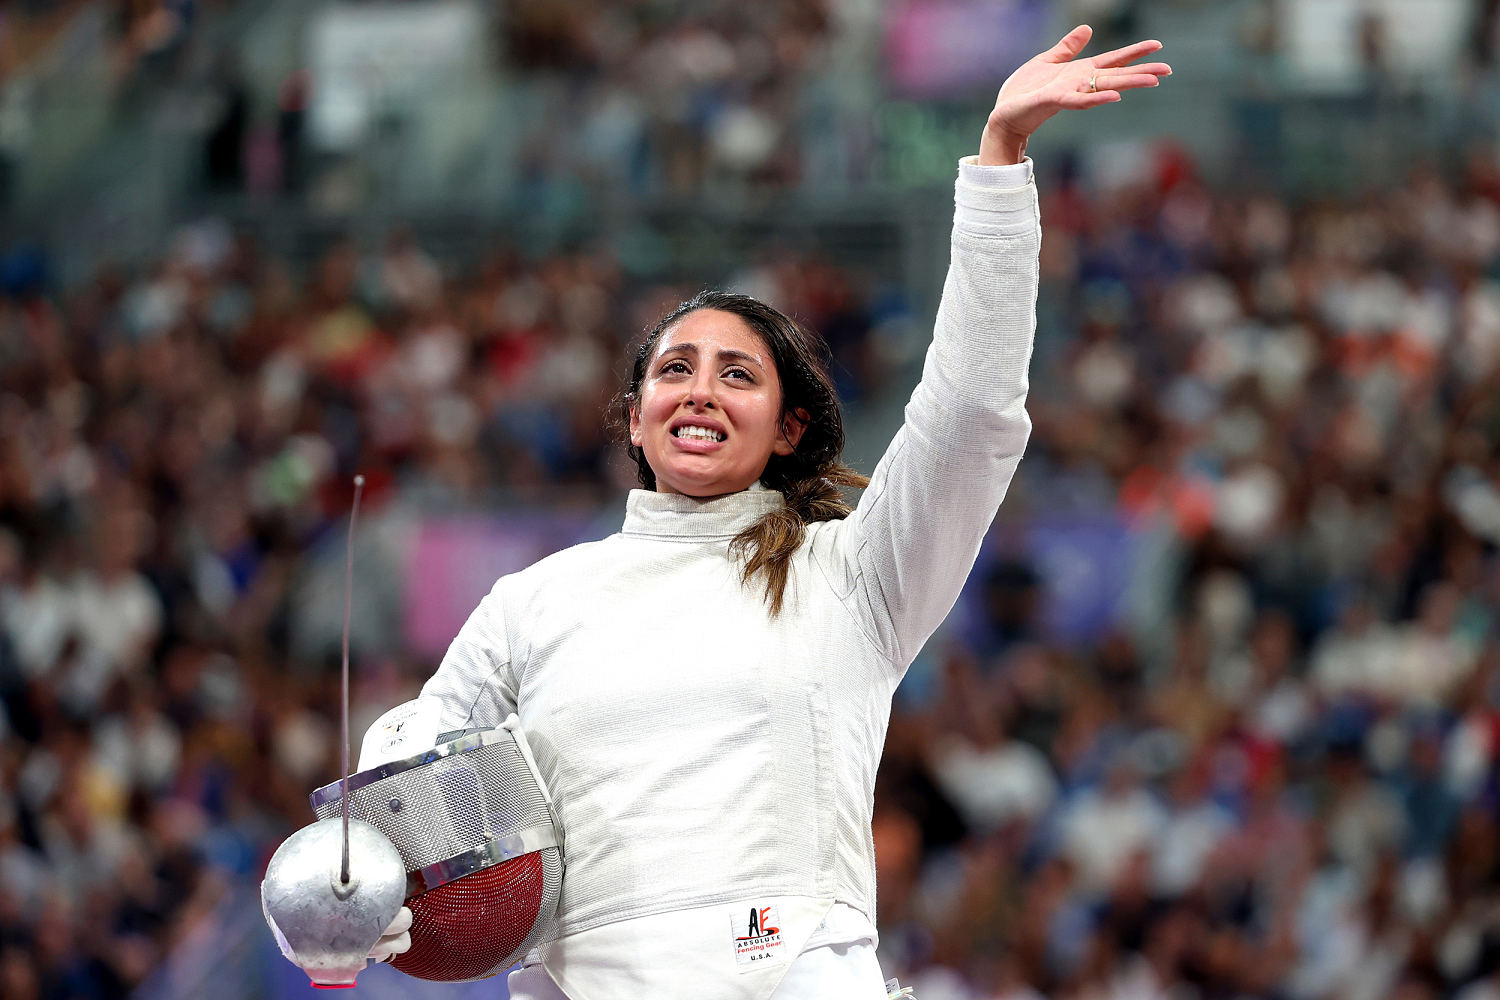 Fencer reveals she competed at Paris Olympics while seven months pregnant